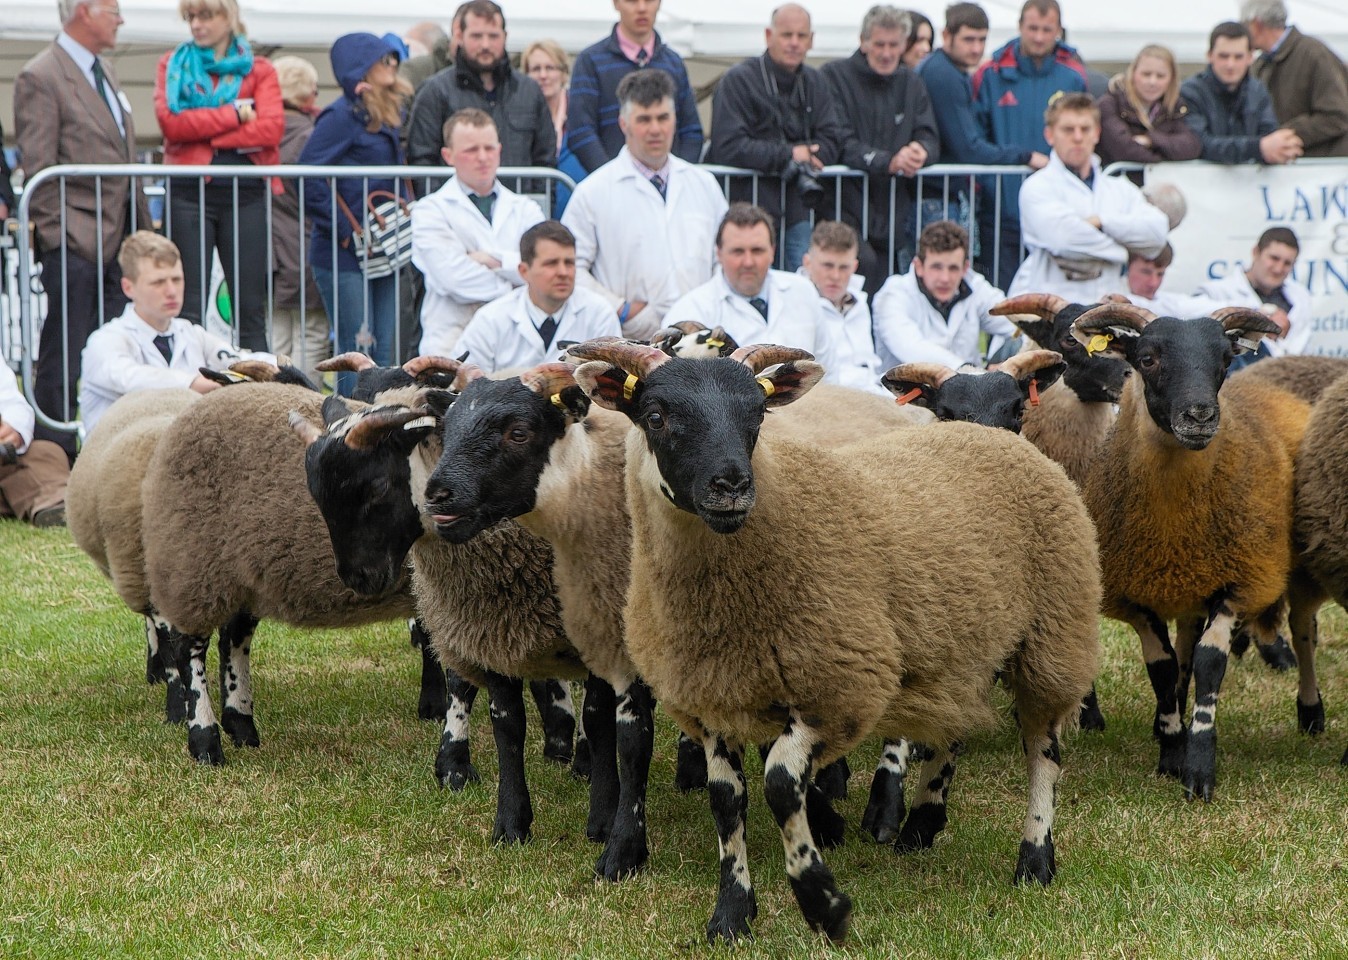 Sheep being shown at the Royal Highland Show